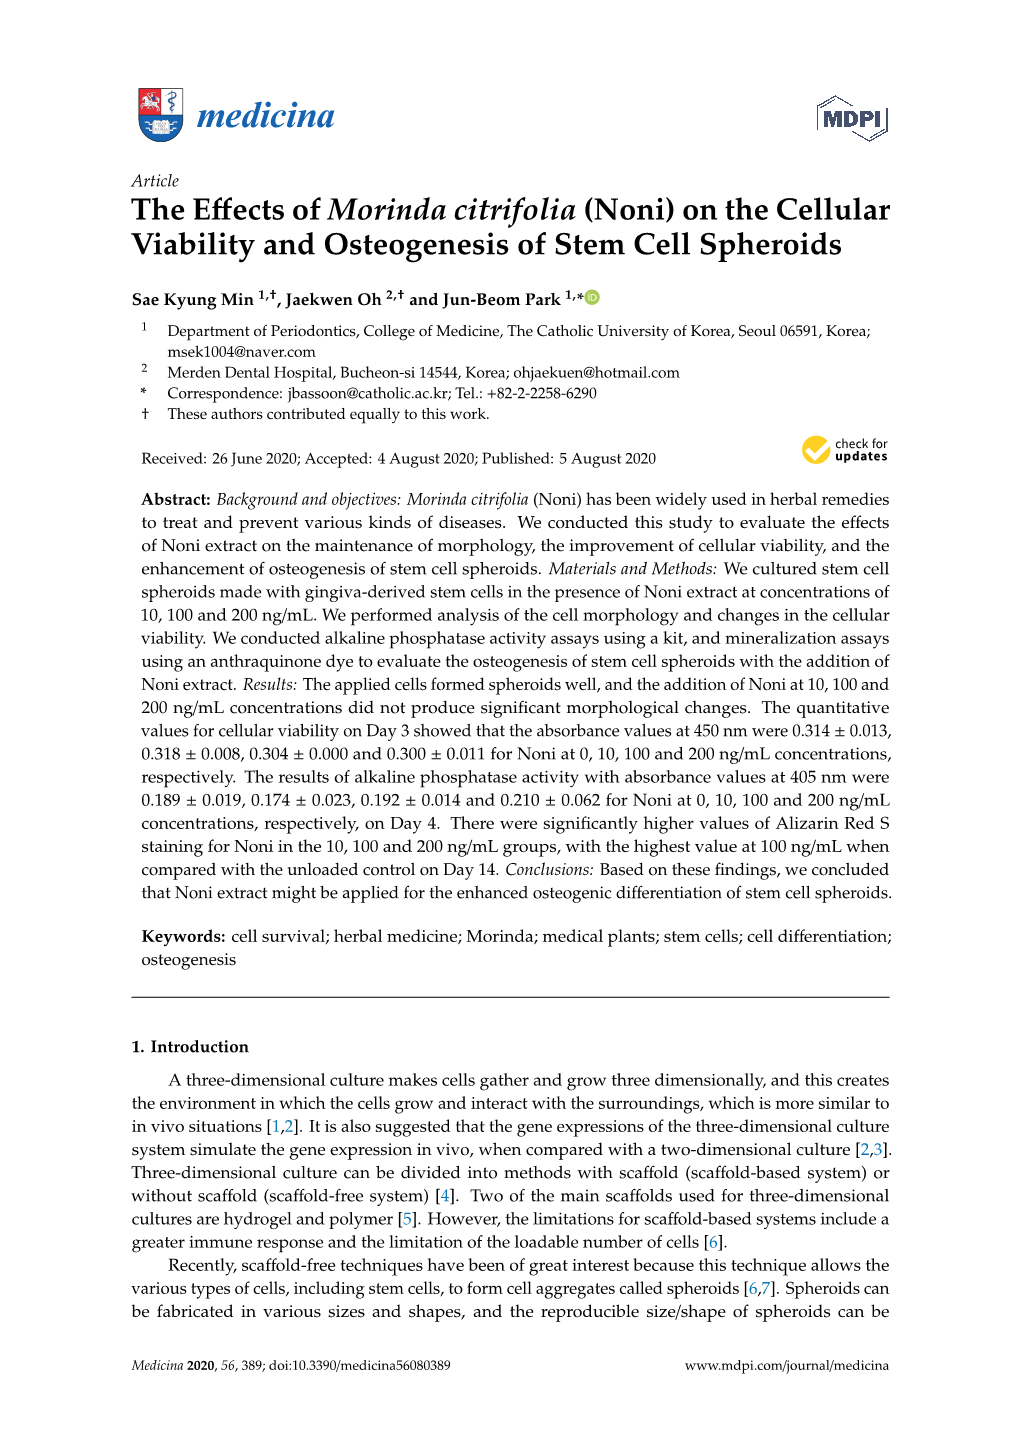 On the Cellular Viability and Osteogenesis of Stem Cell Spheroids